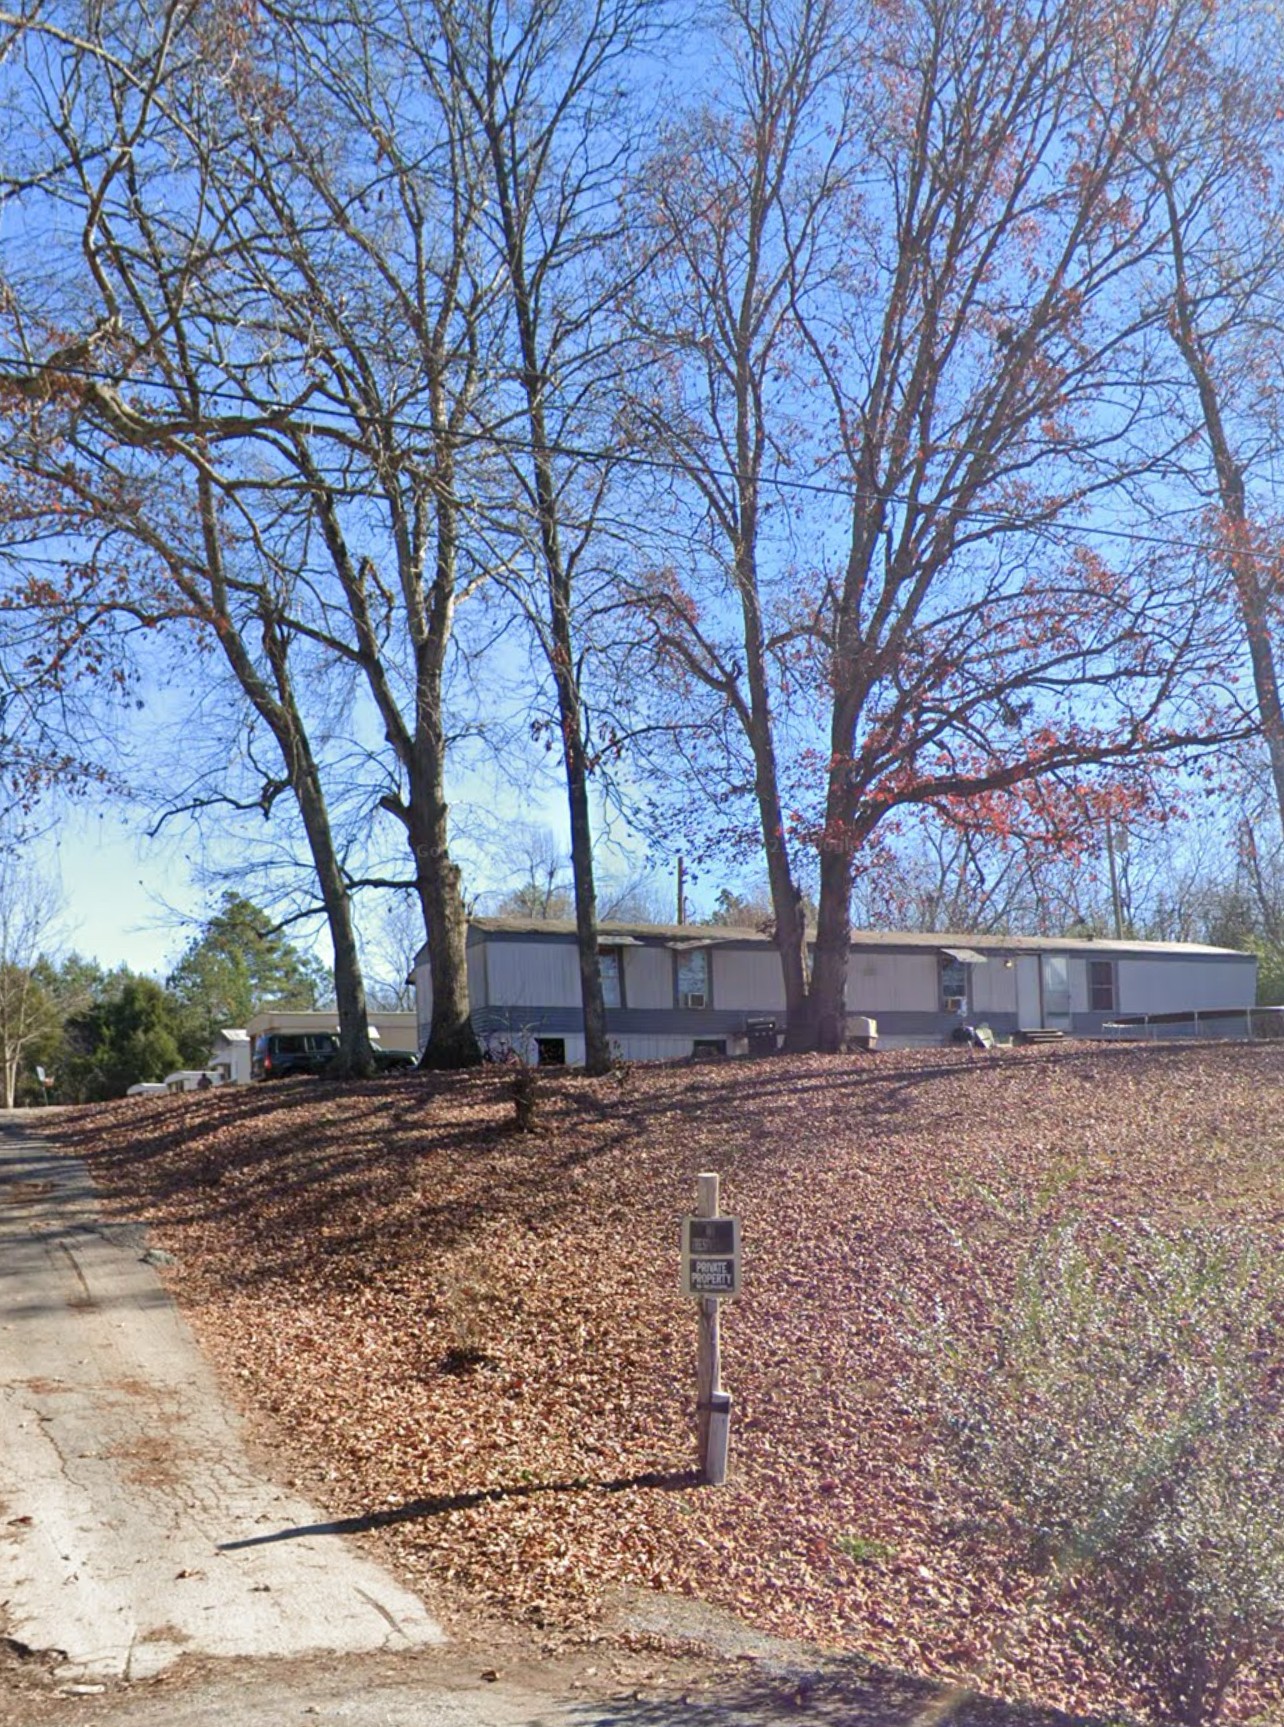 a view of a yard with trees